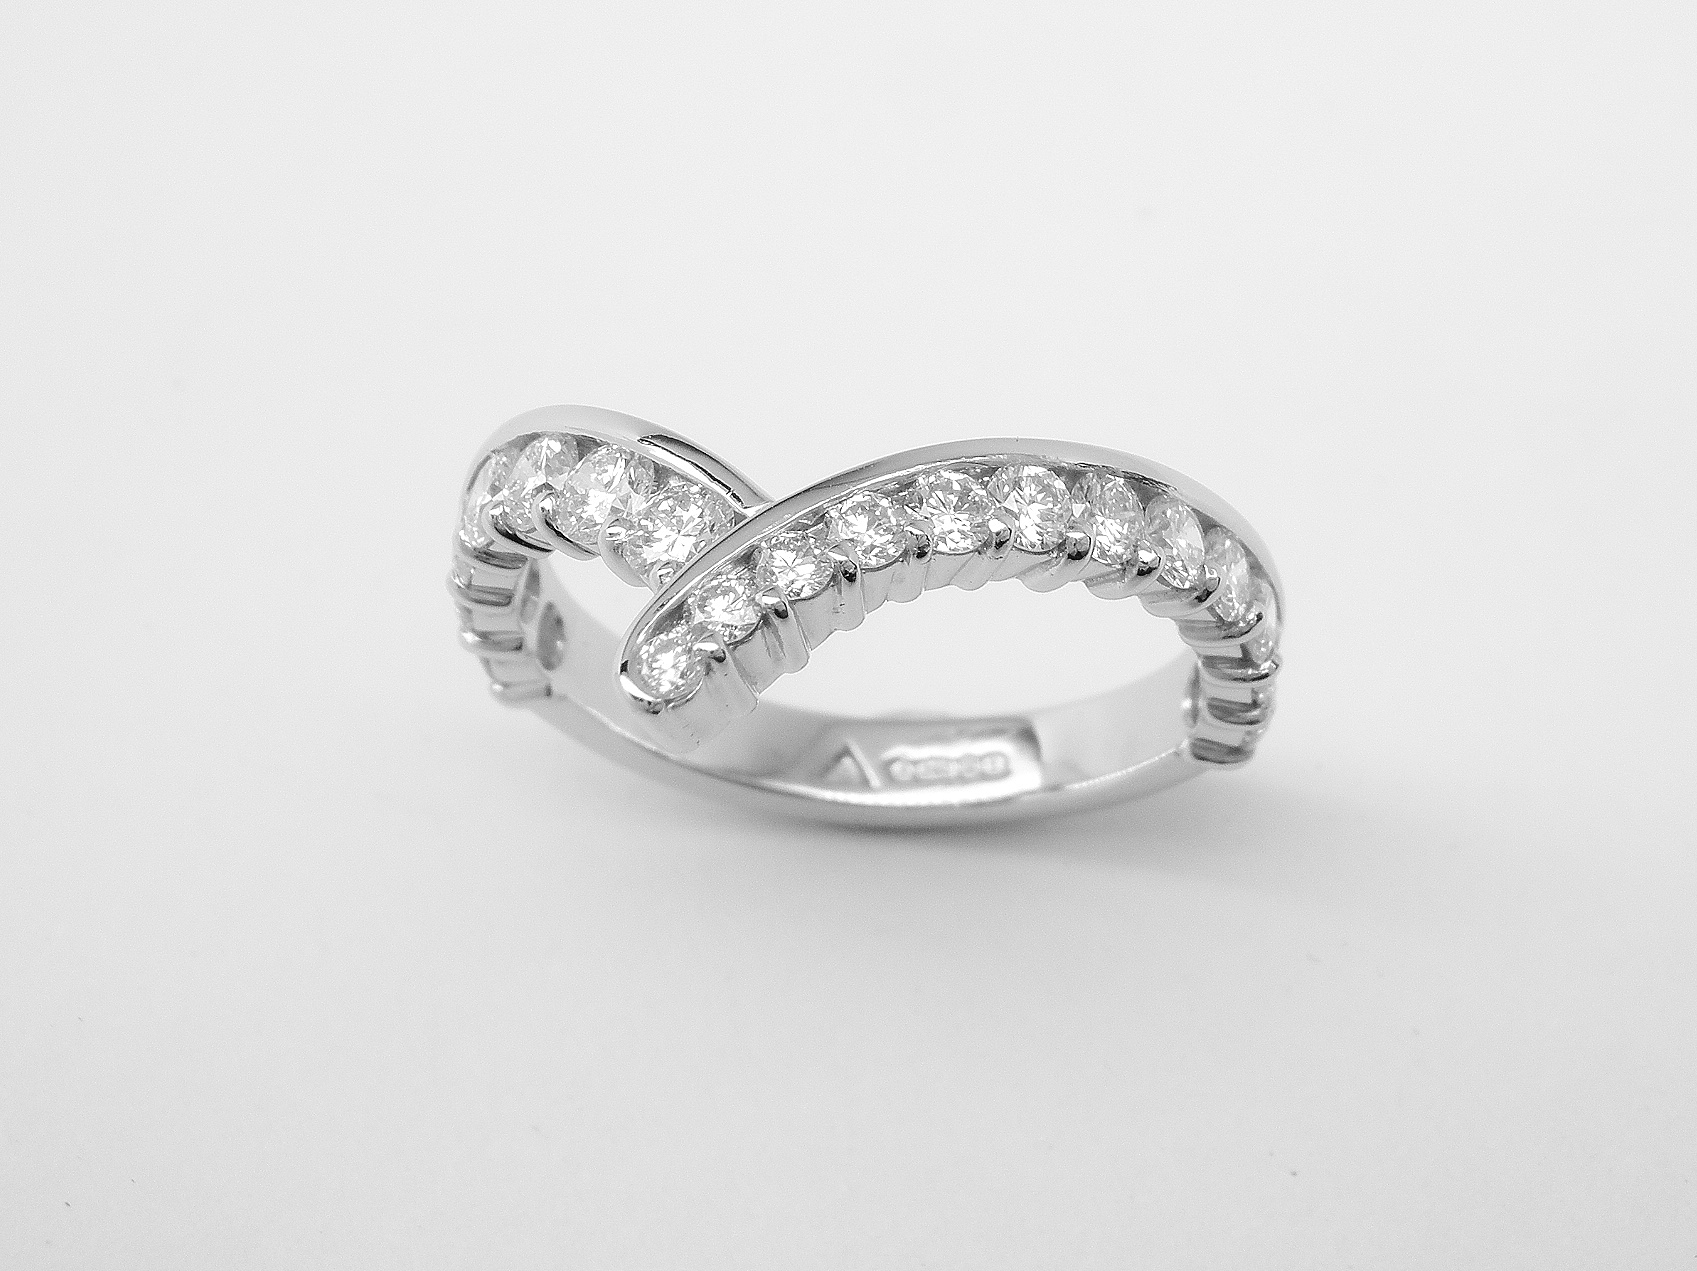 A 19 stone part channel set wishbone cross-over styled ring mounted in platinum. There are 12 tapering diamonds on the right side and 7 of the same size on the left side.